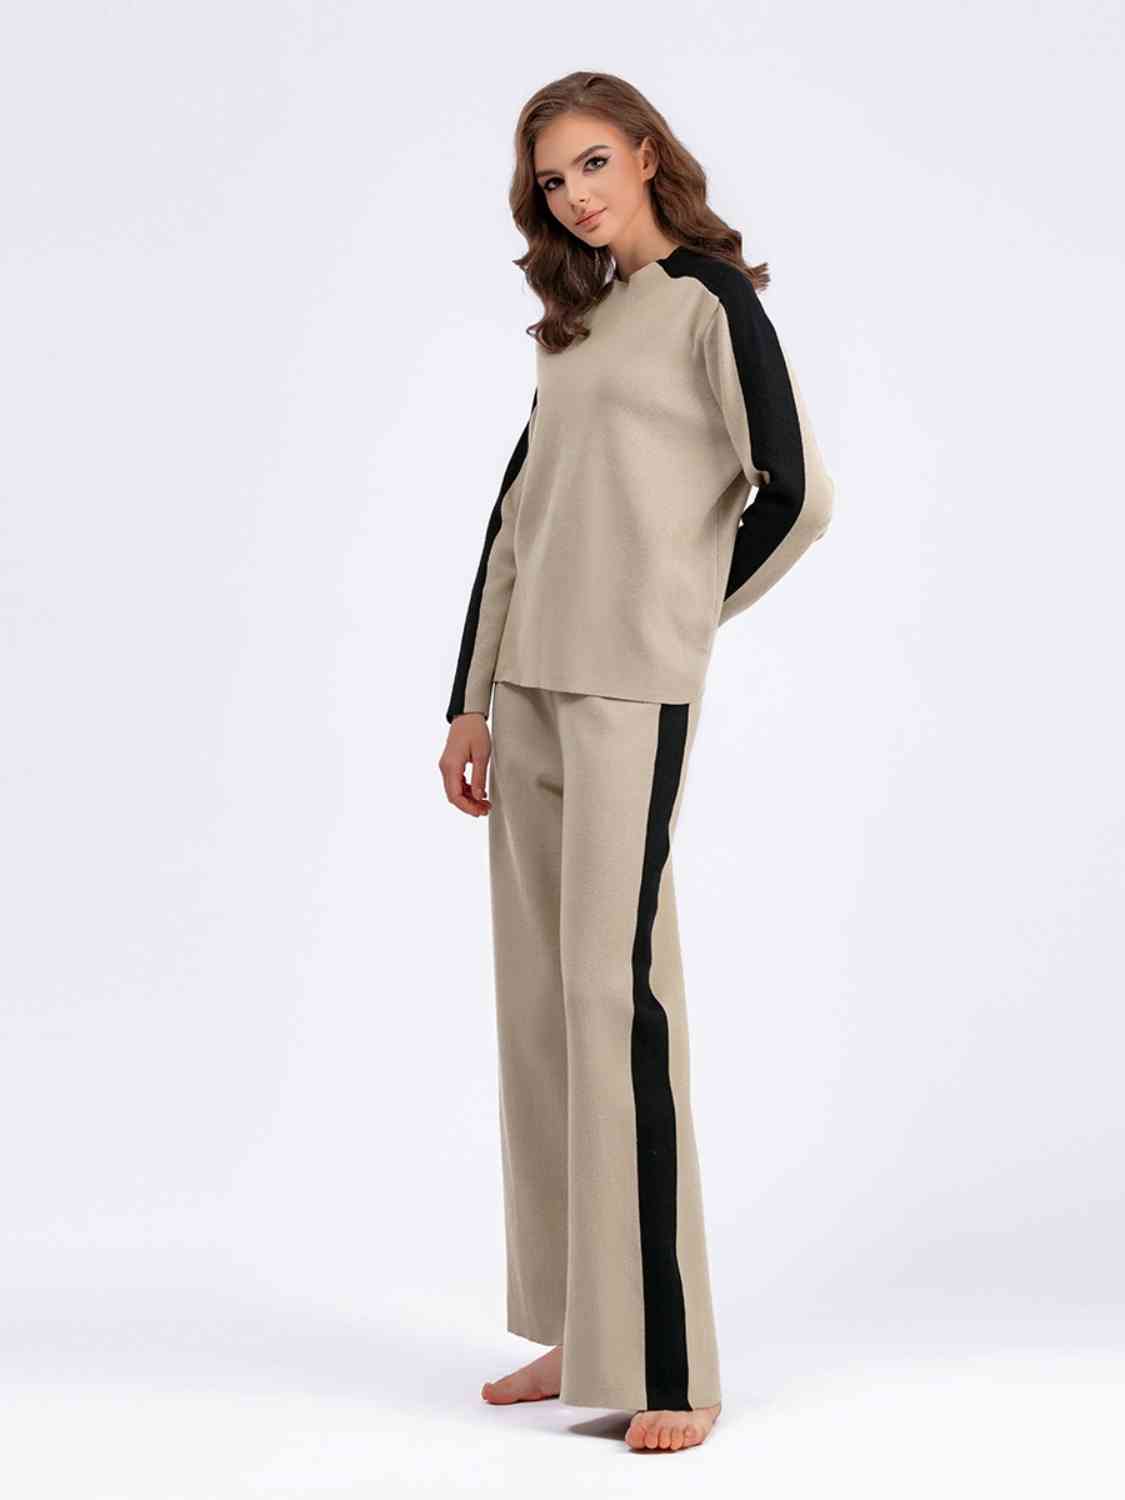 Women's Contrast Sweater and Knit Pants Set